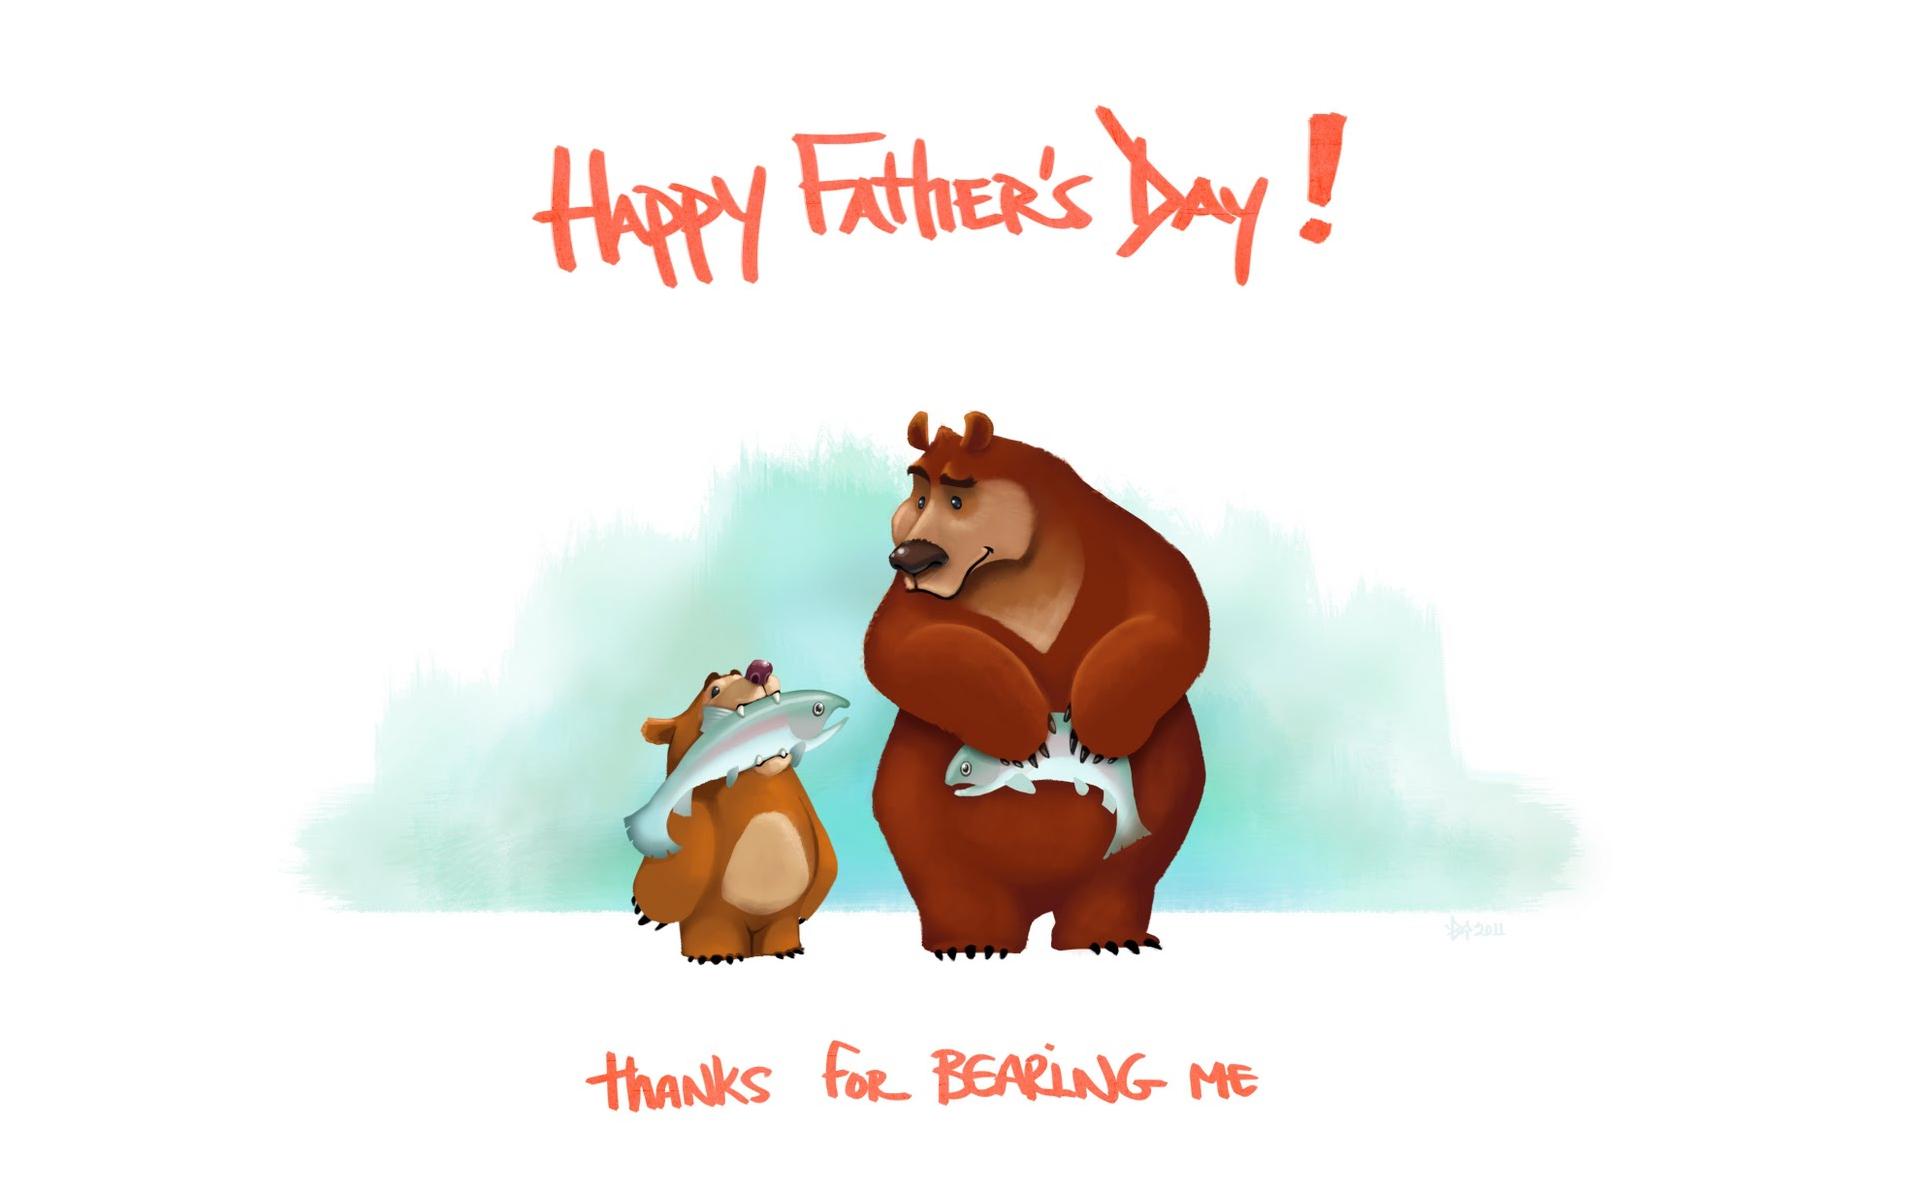 Download "Cute happy fathers day hd image" wallpaper for mobile c...